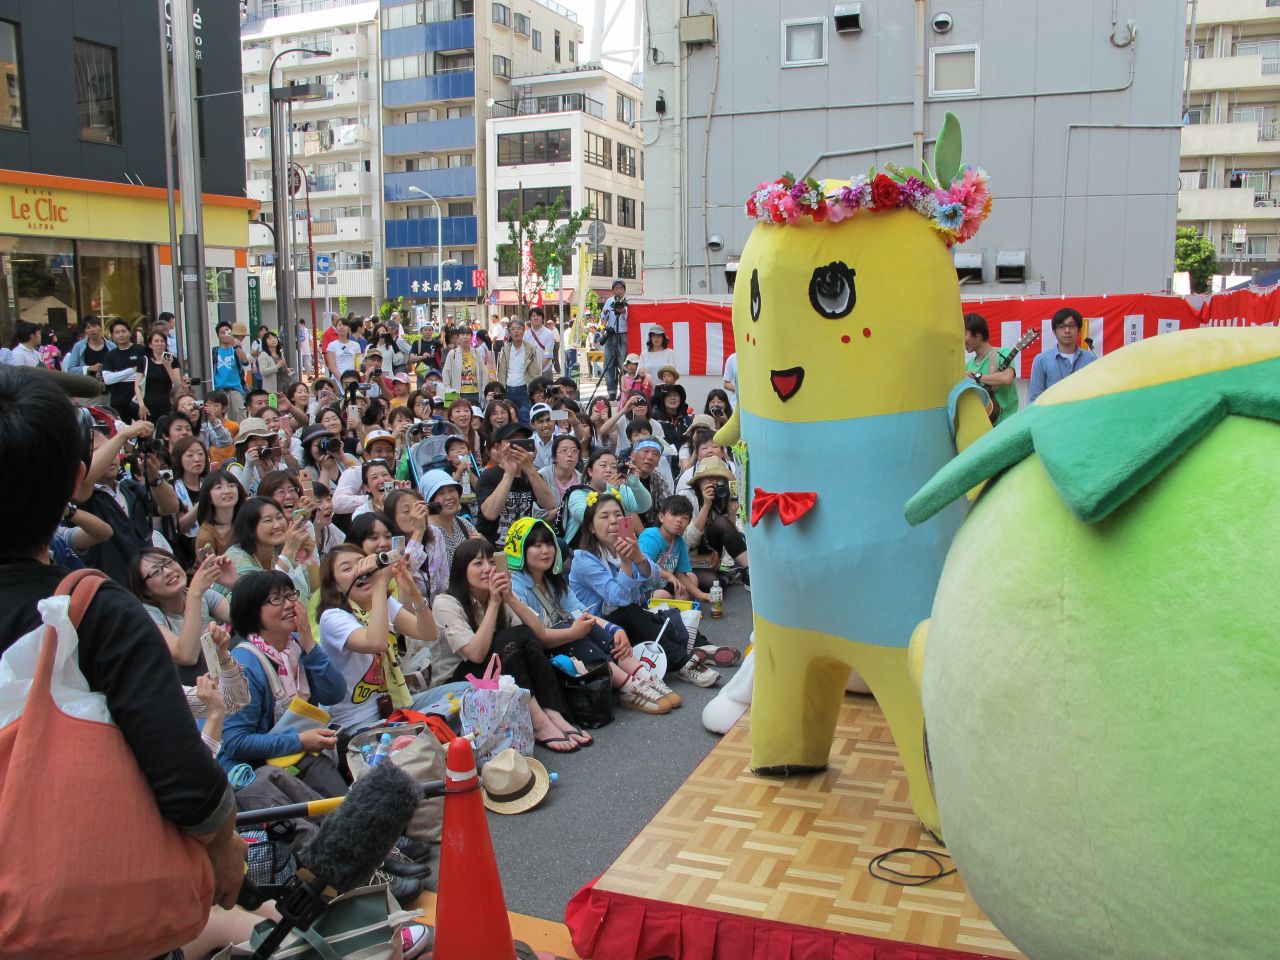 From the humble beginnings of a youtube channel, Funassyi's popularity has exploded in the last two years. His resume includes television commercials, talk show appearances, music videos and even his own novelty single released by Universal Music.